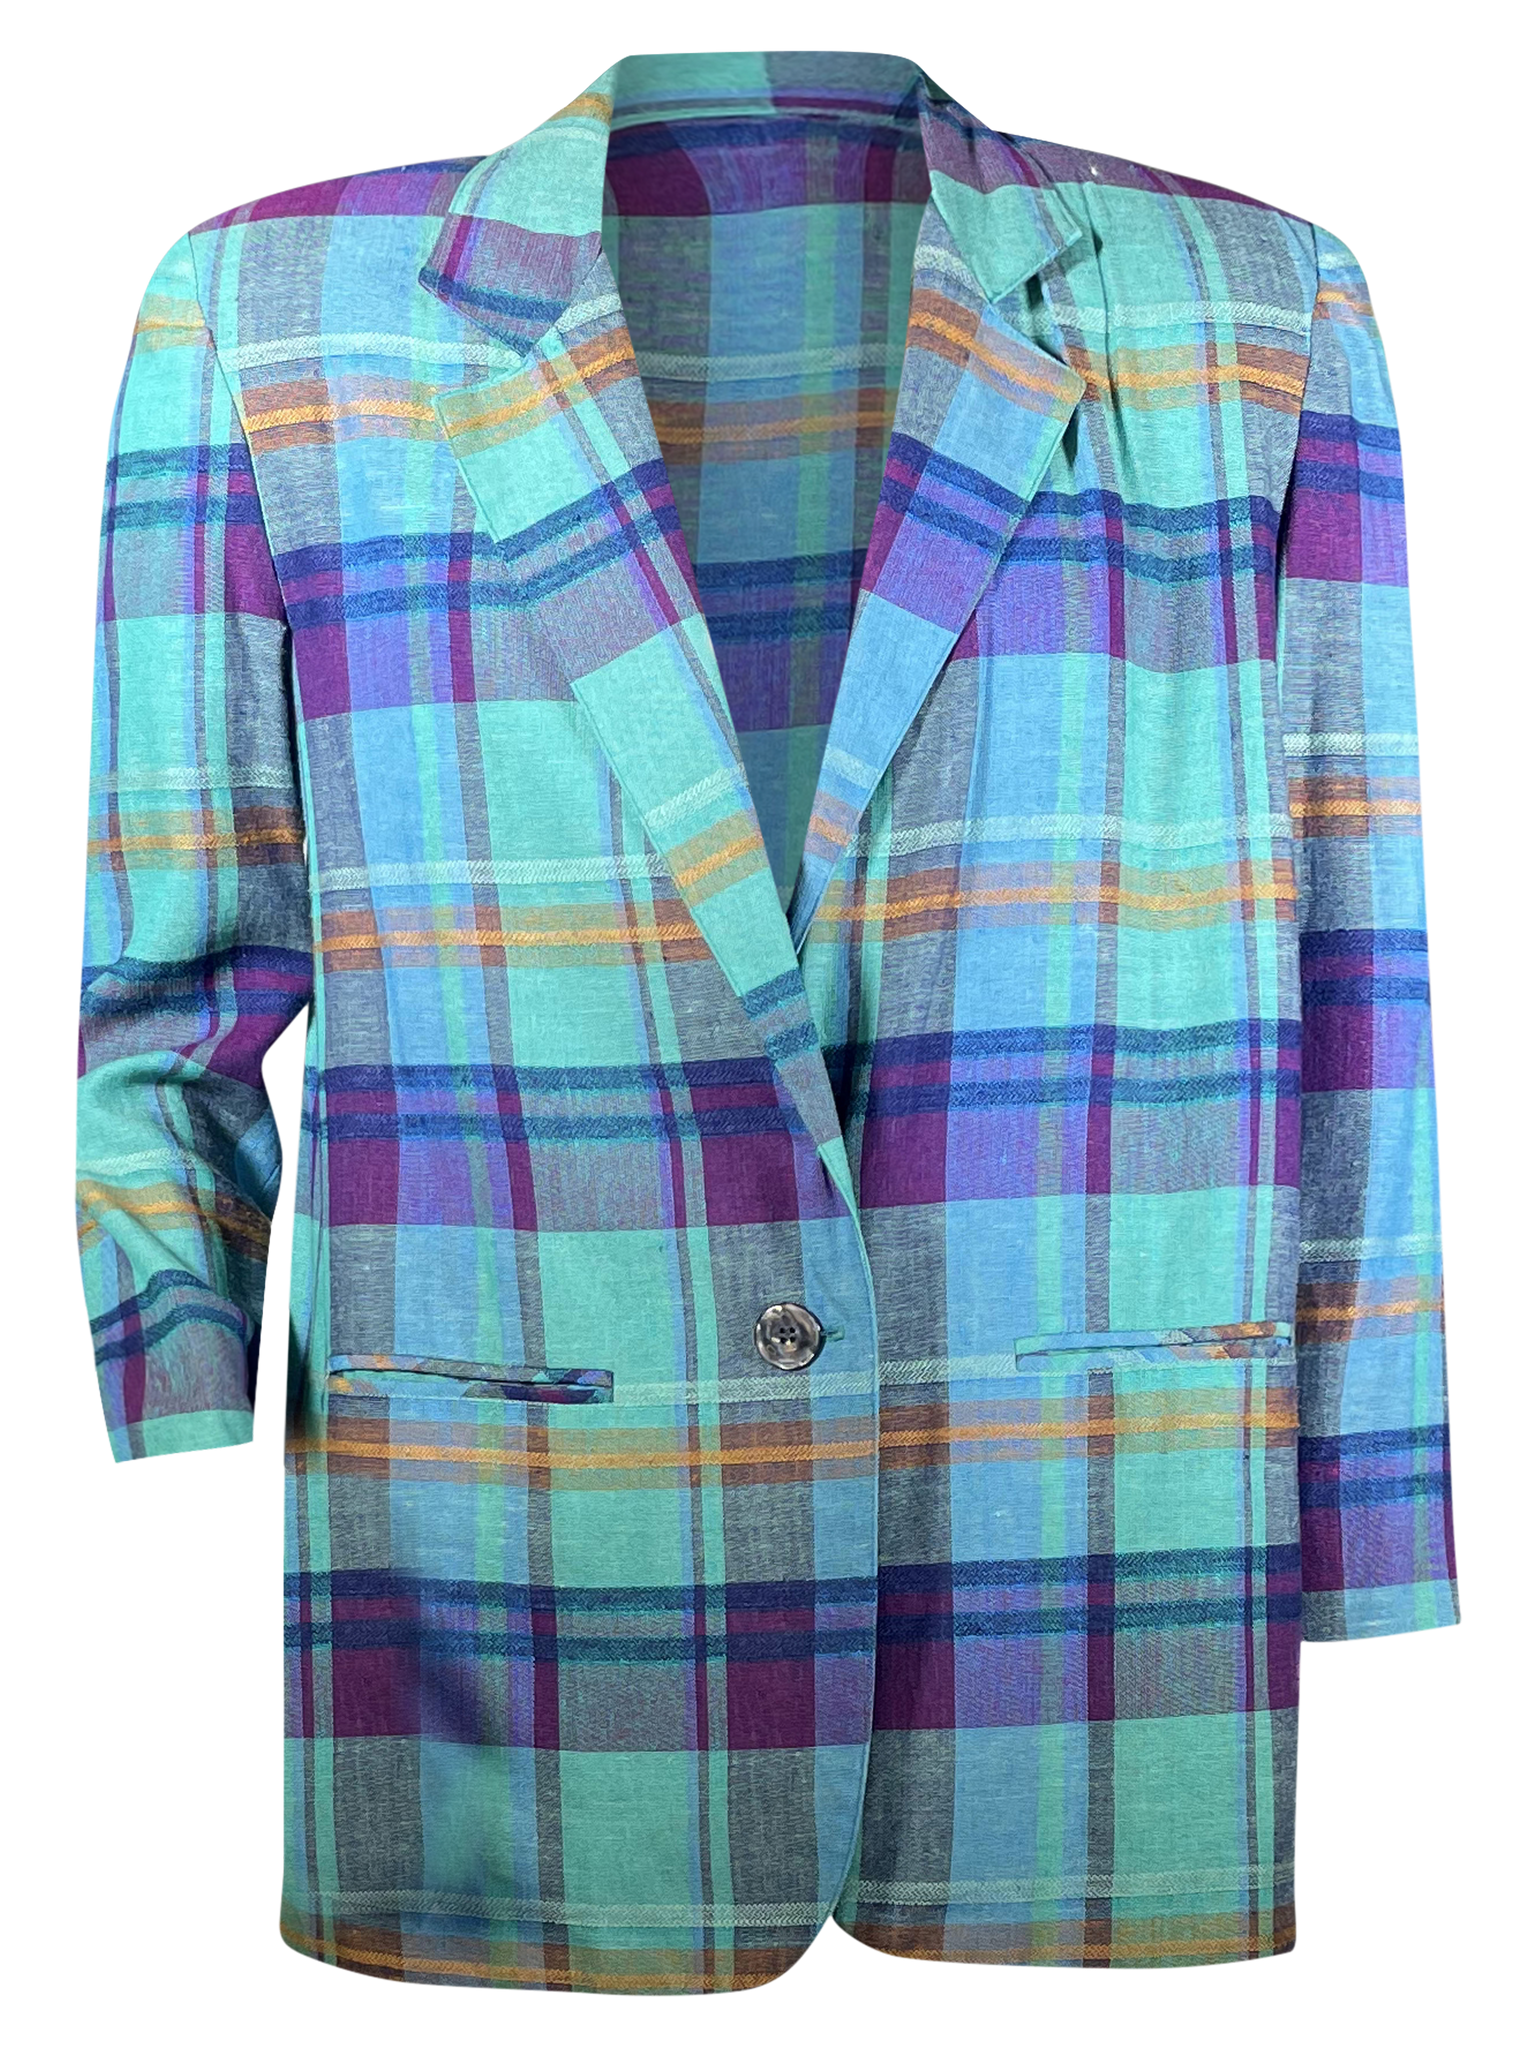 Caddyshack Blazer in Teal and Purple